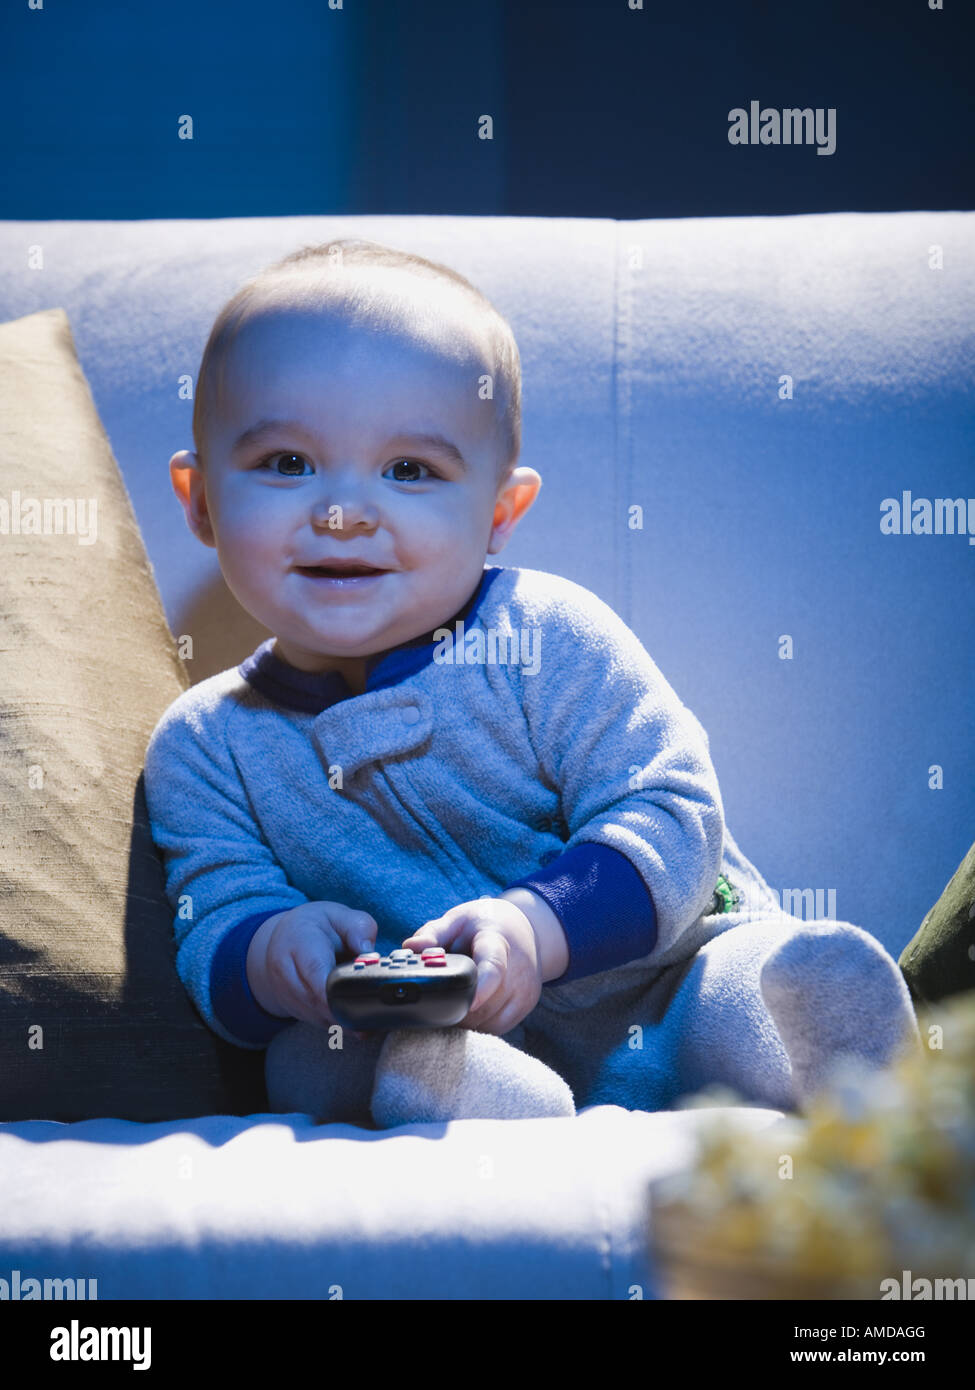 Baby on sofa with television remote smiling Stock Photo